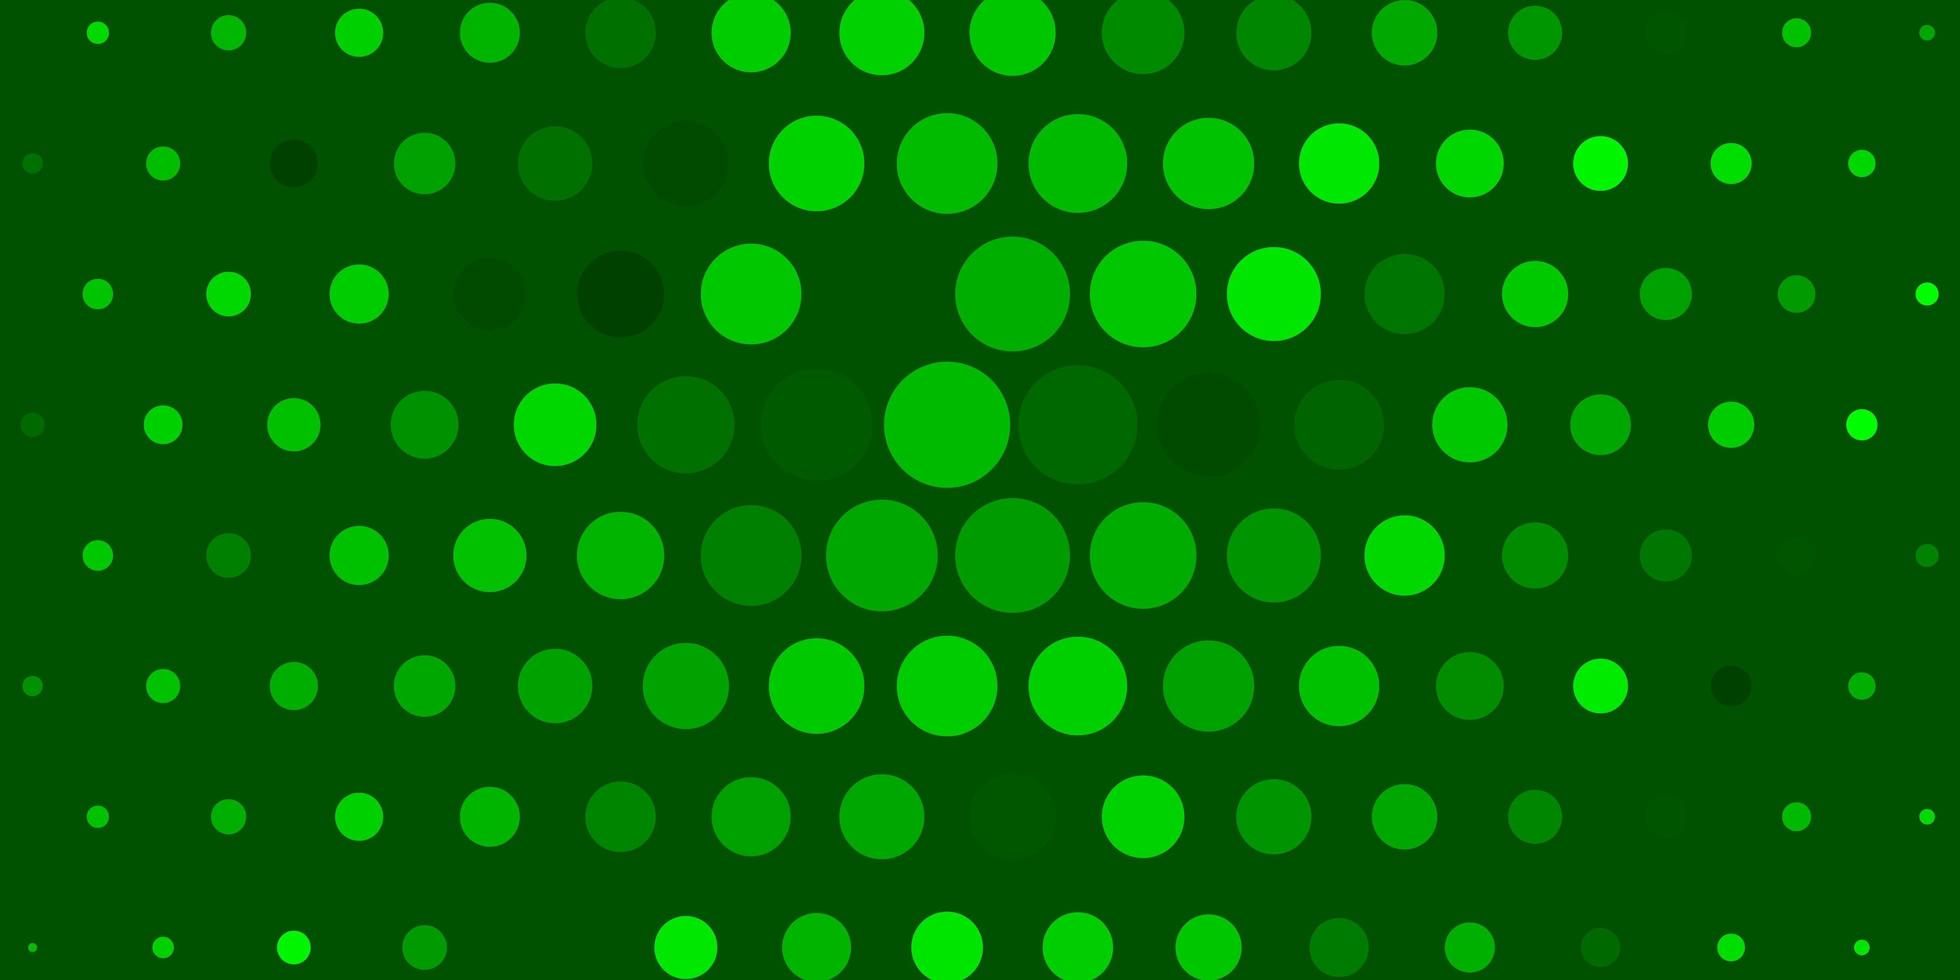 Light Green vector pattern with spheres Colorful illustration with gradient dots in nature style Design for your commercials